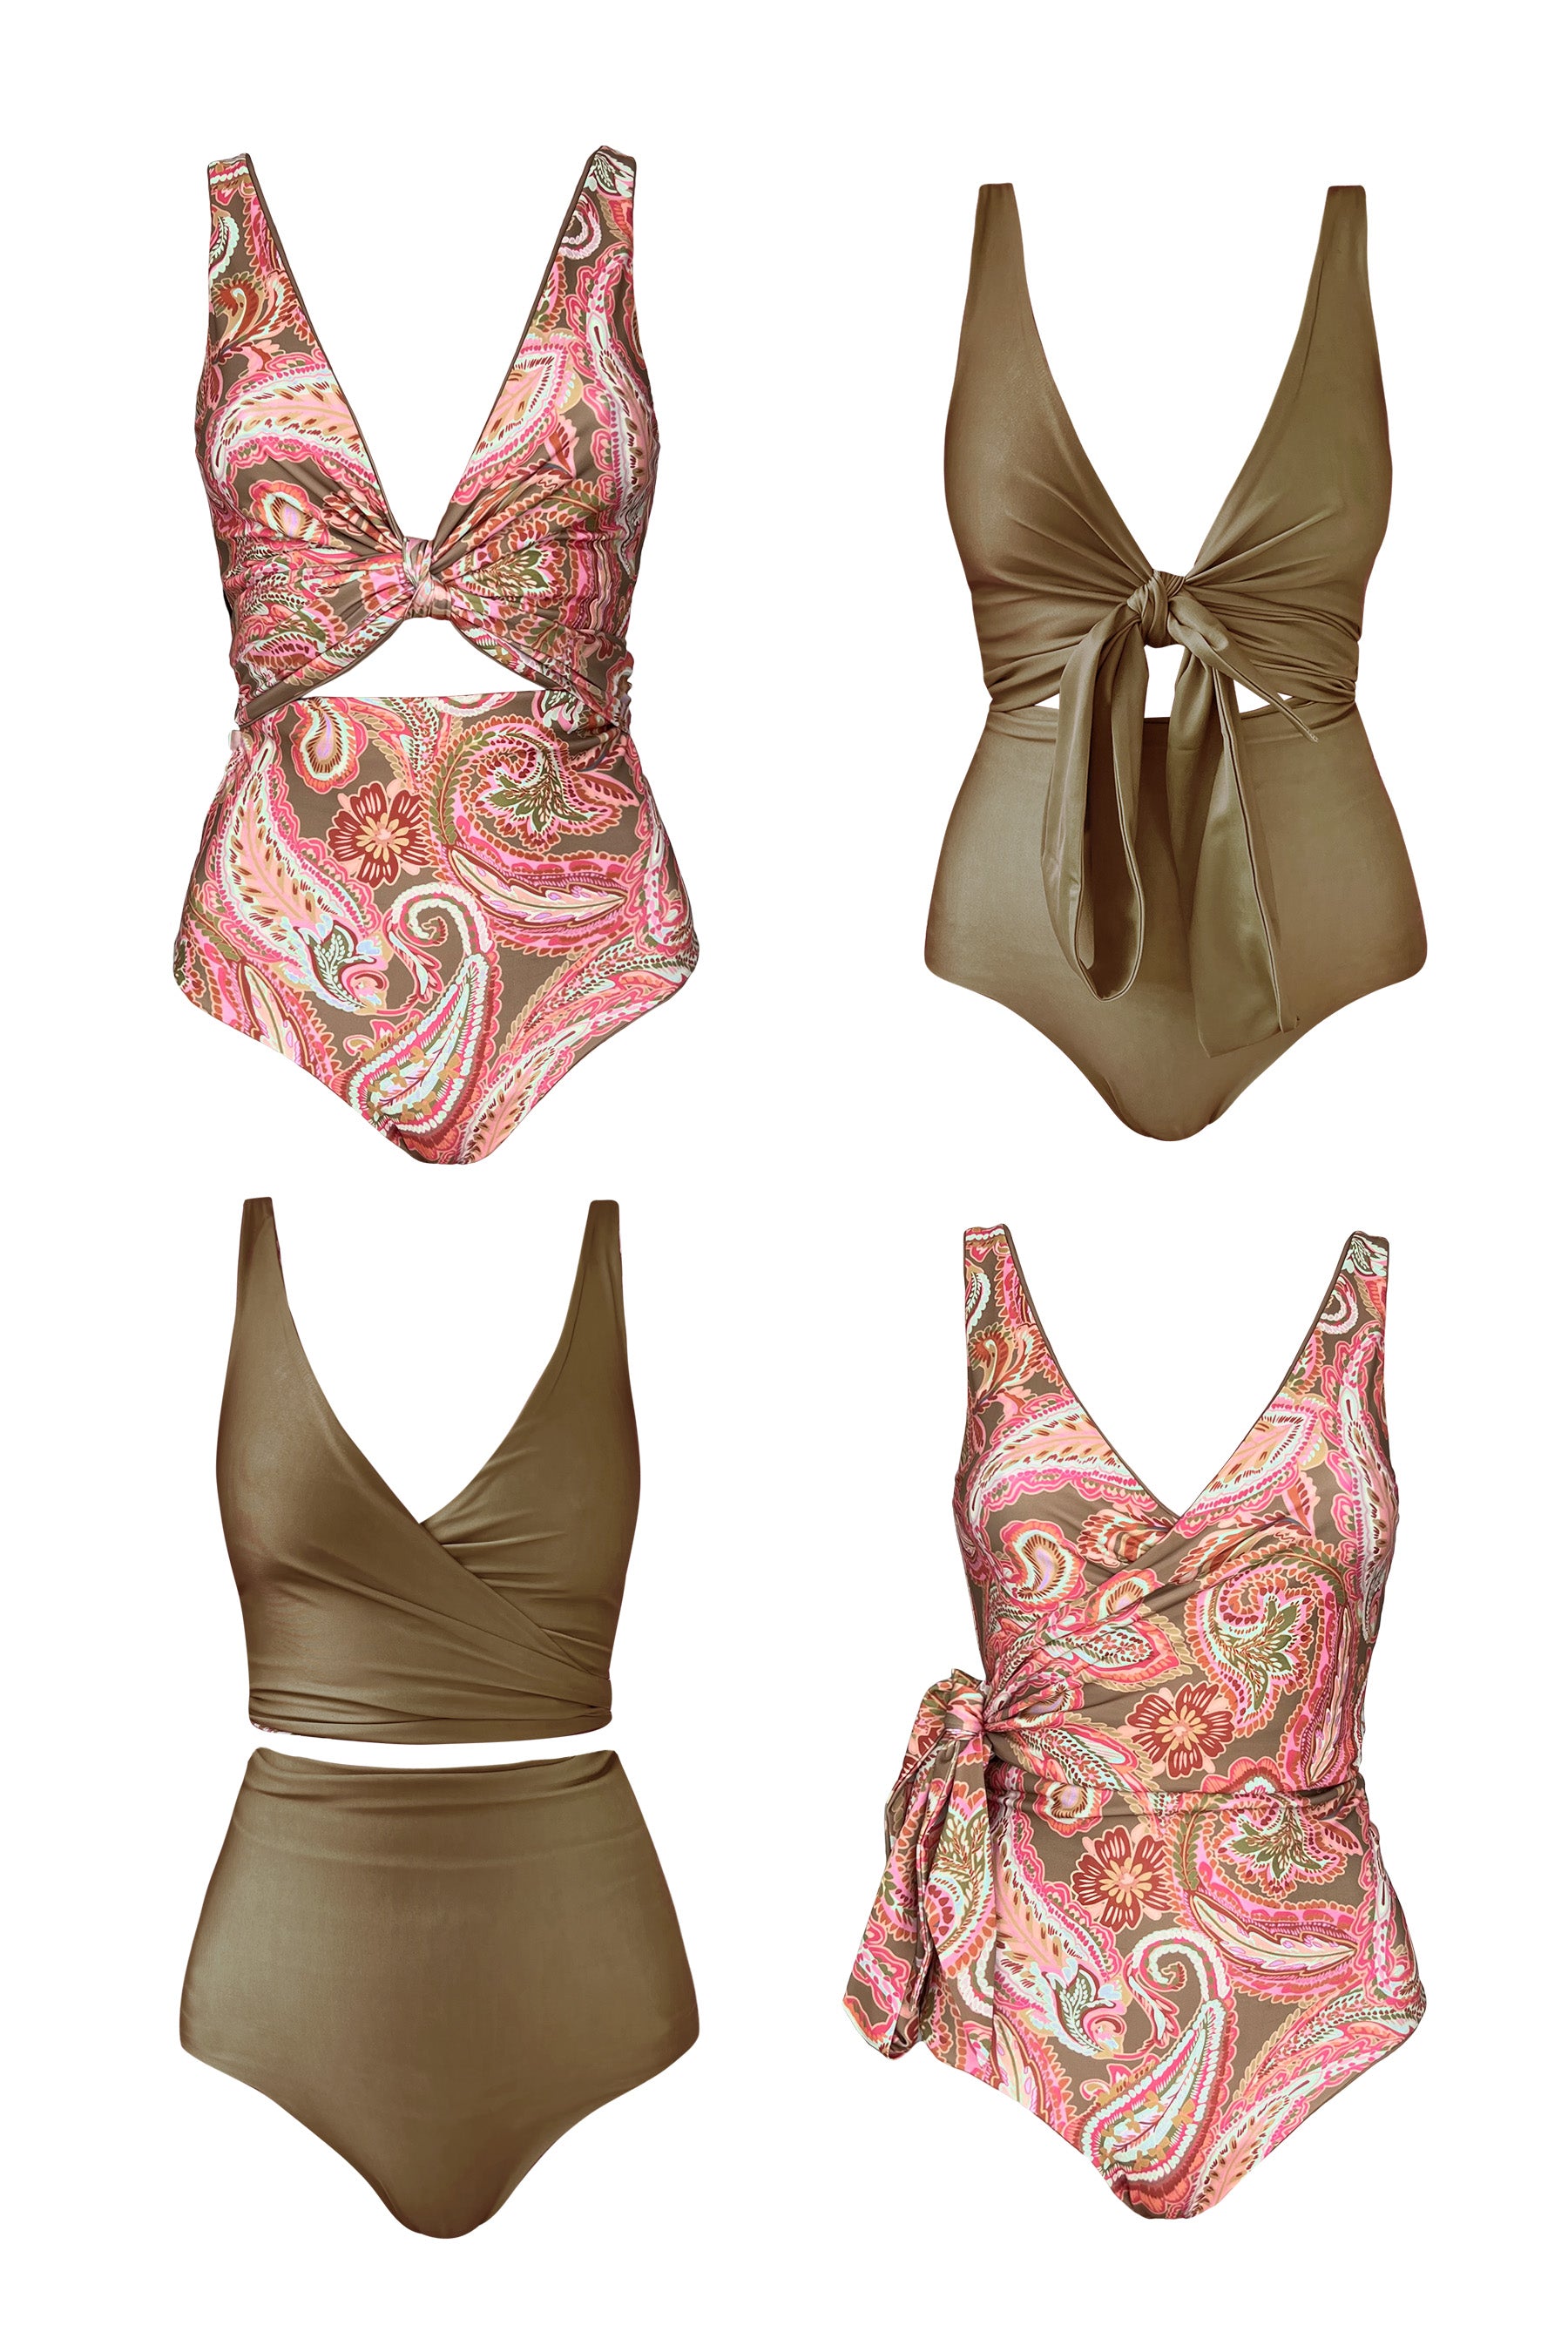 Product images of four different looks that can be made with just one Barcelona reversible bikini